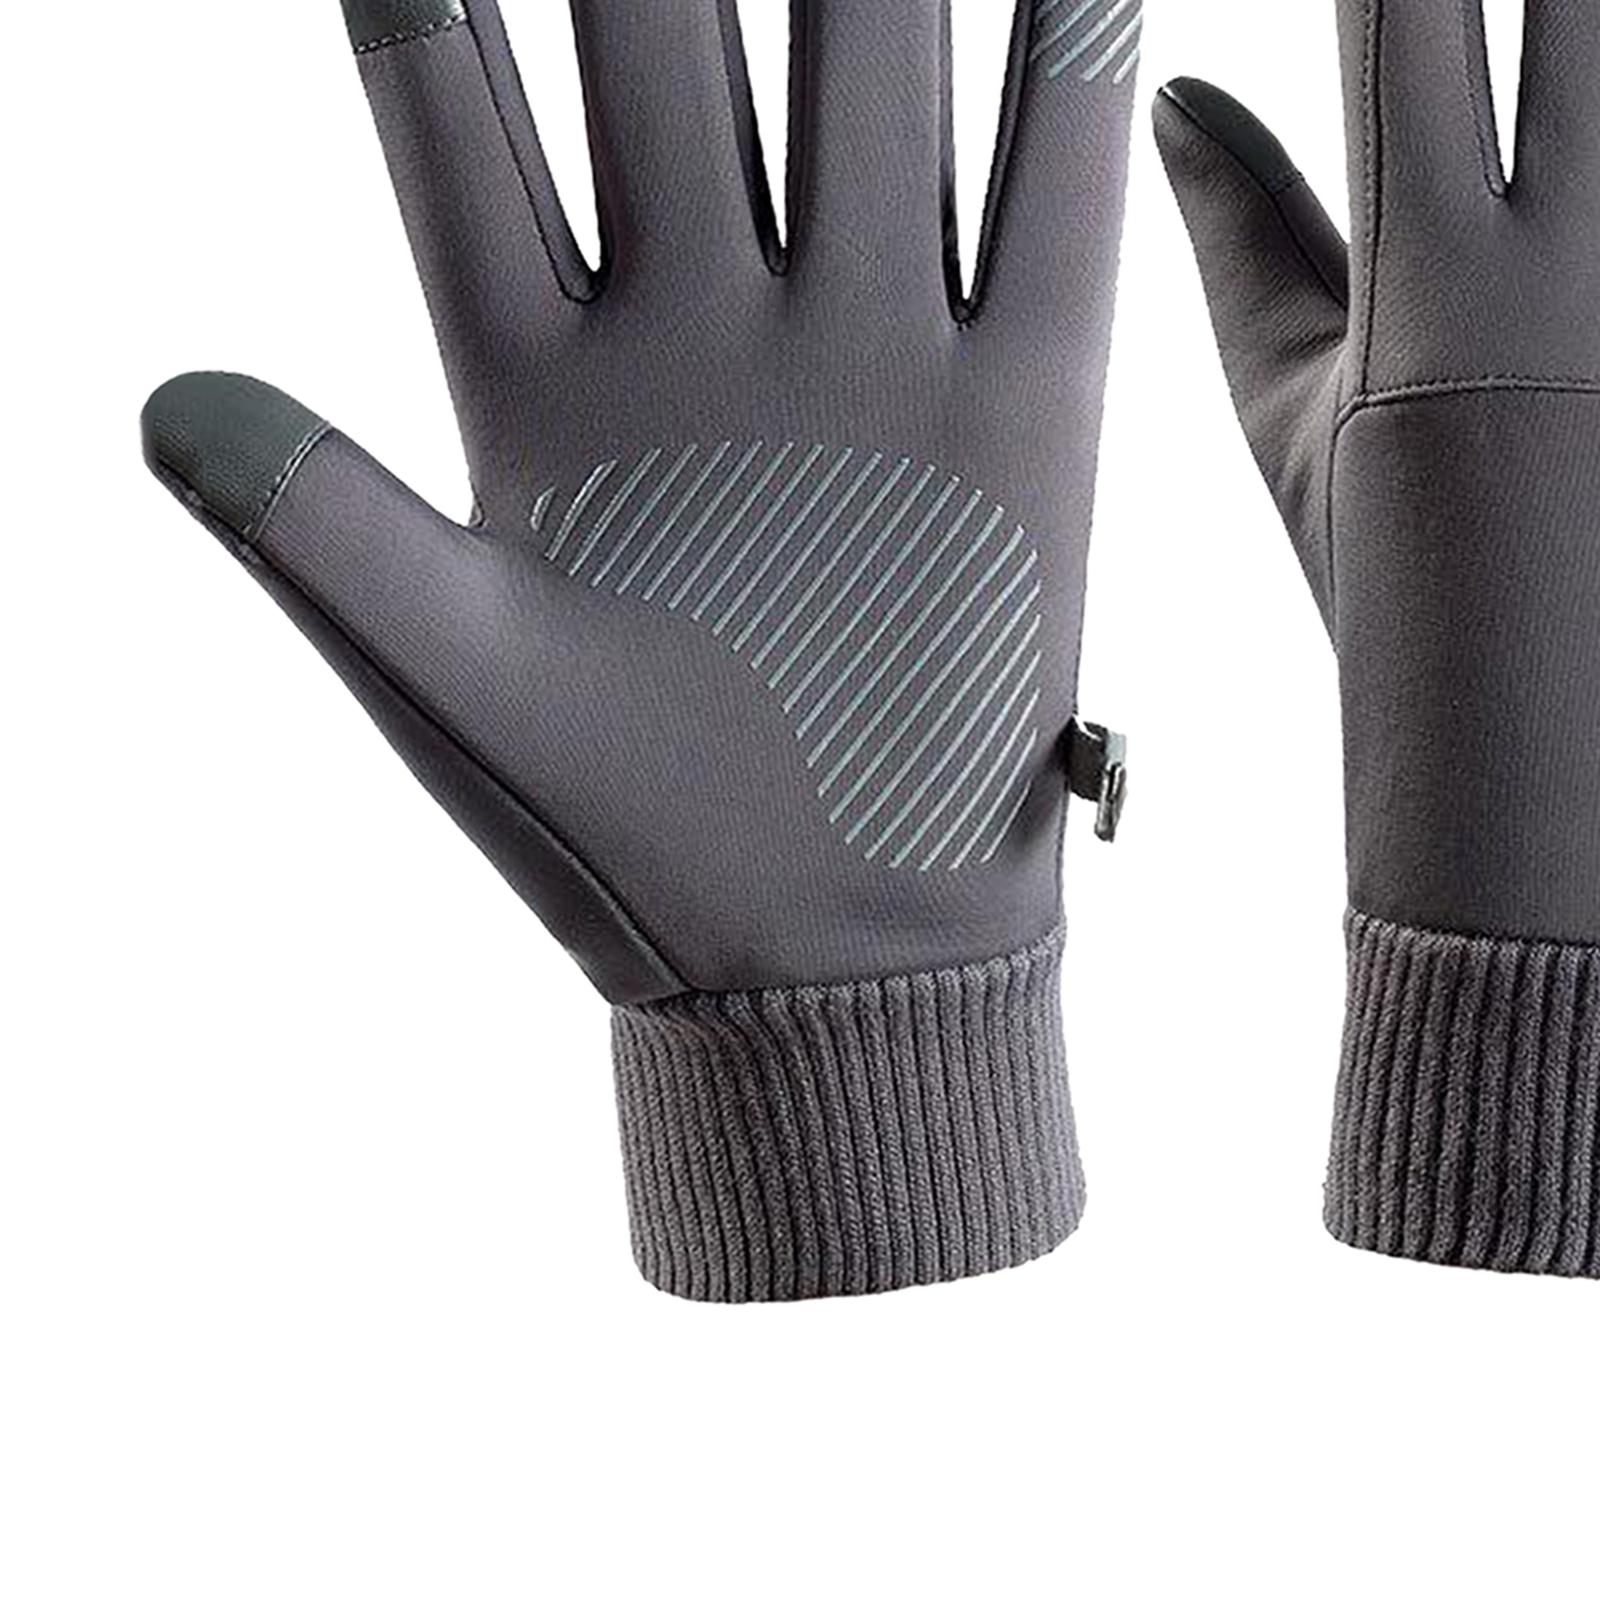 Winter Outdoor Cycling Hiking Sports Gloves Touch Screen L Gray K147